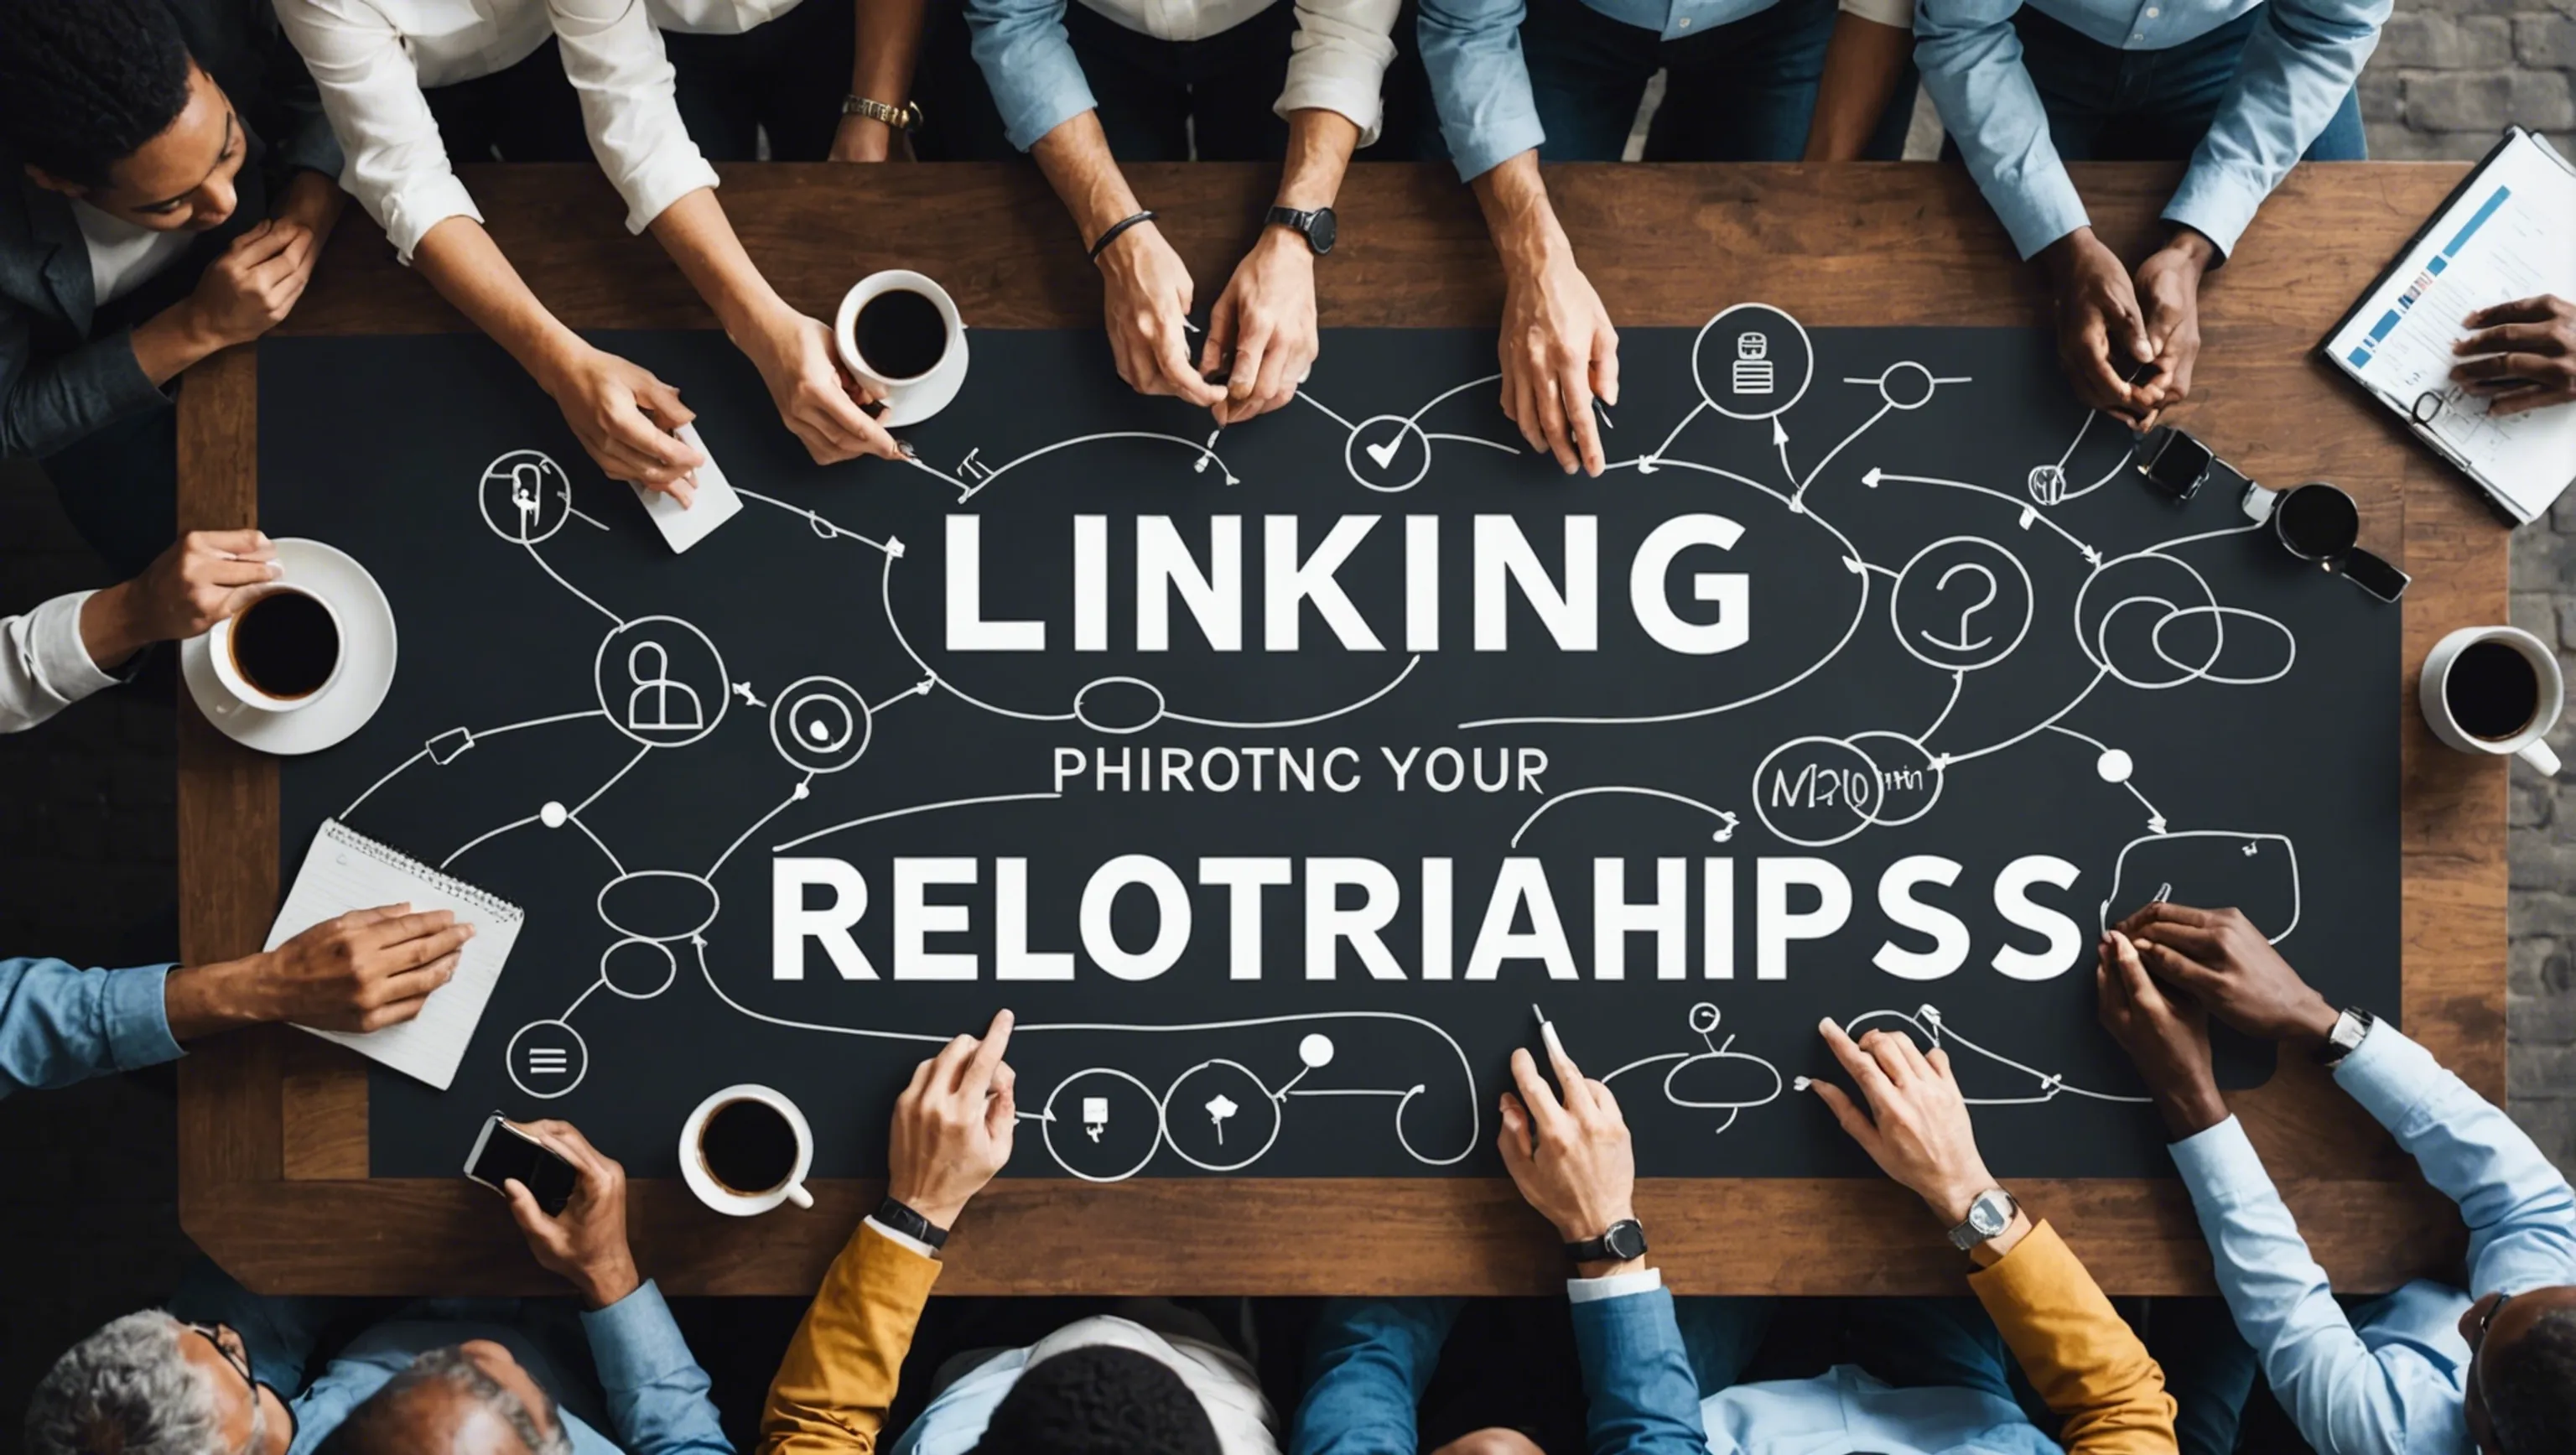 Providing value to your audience through linking to resources and guides